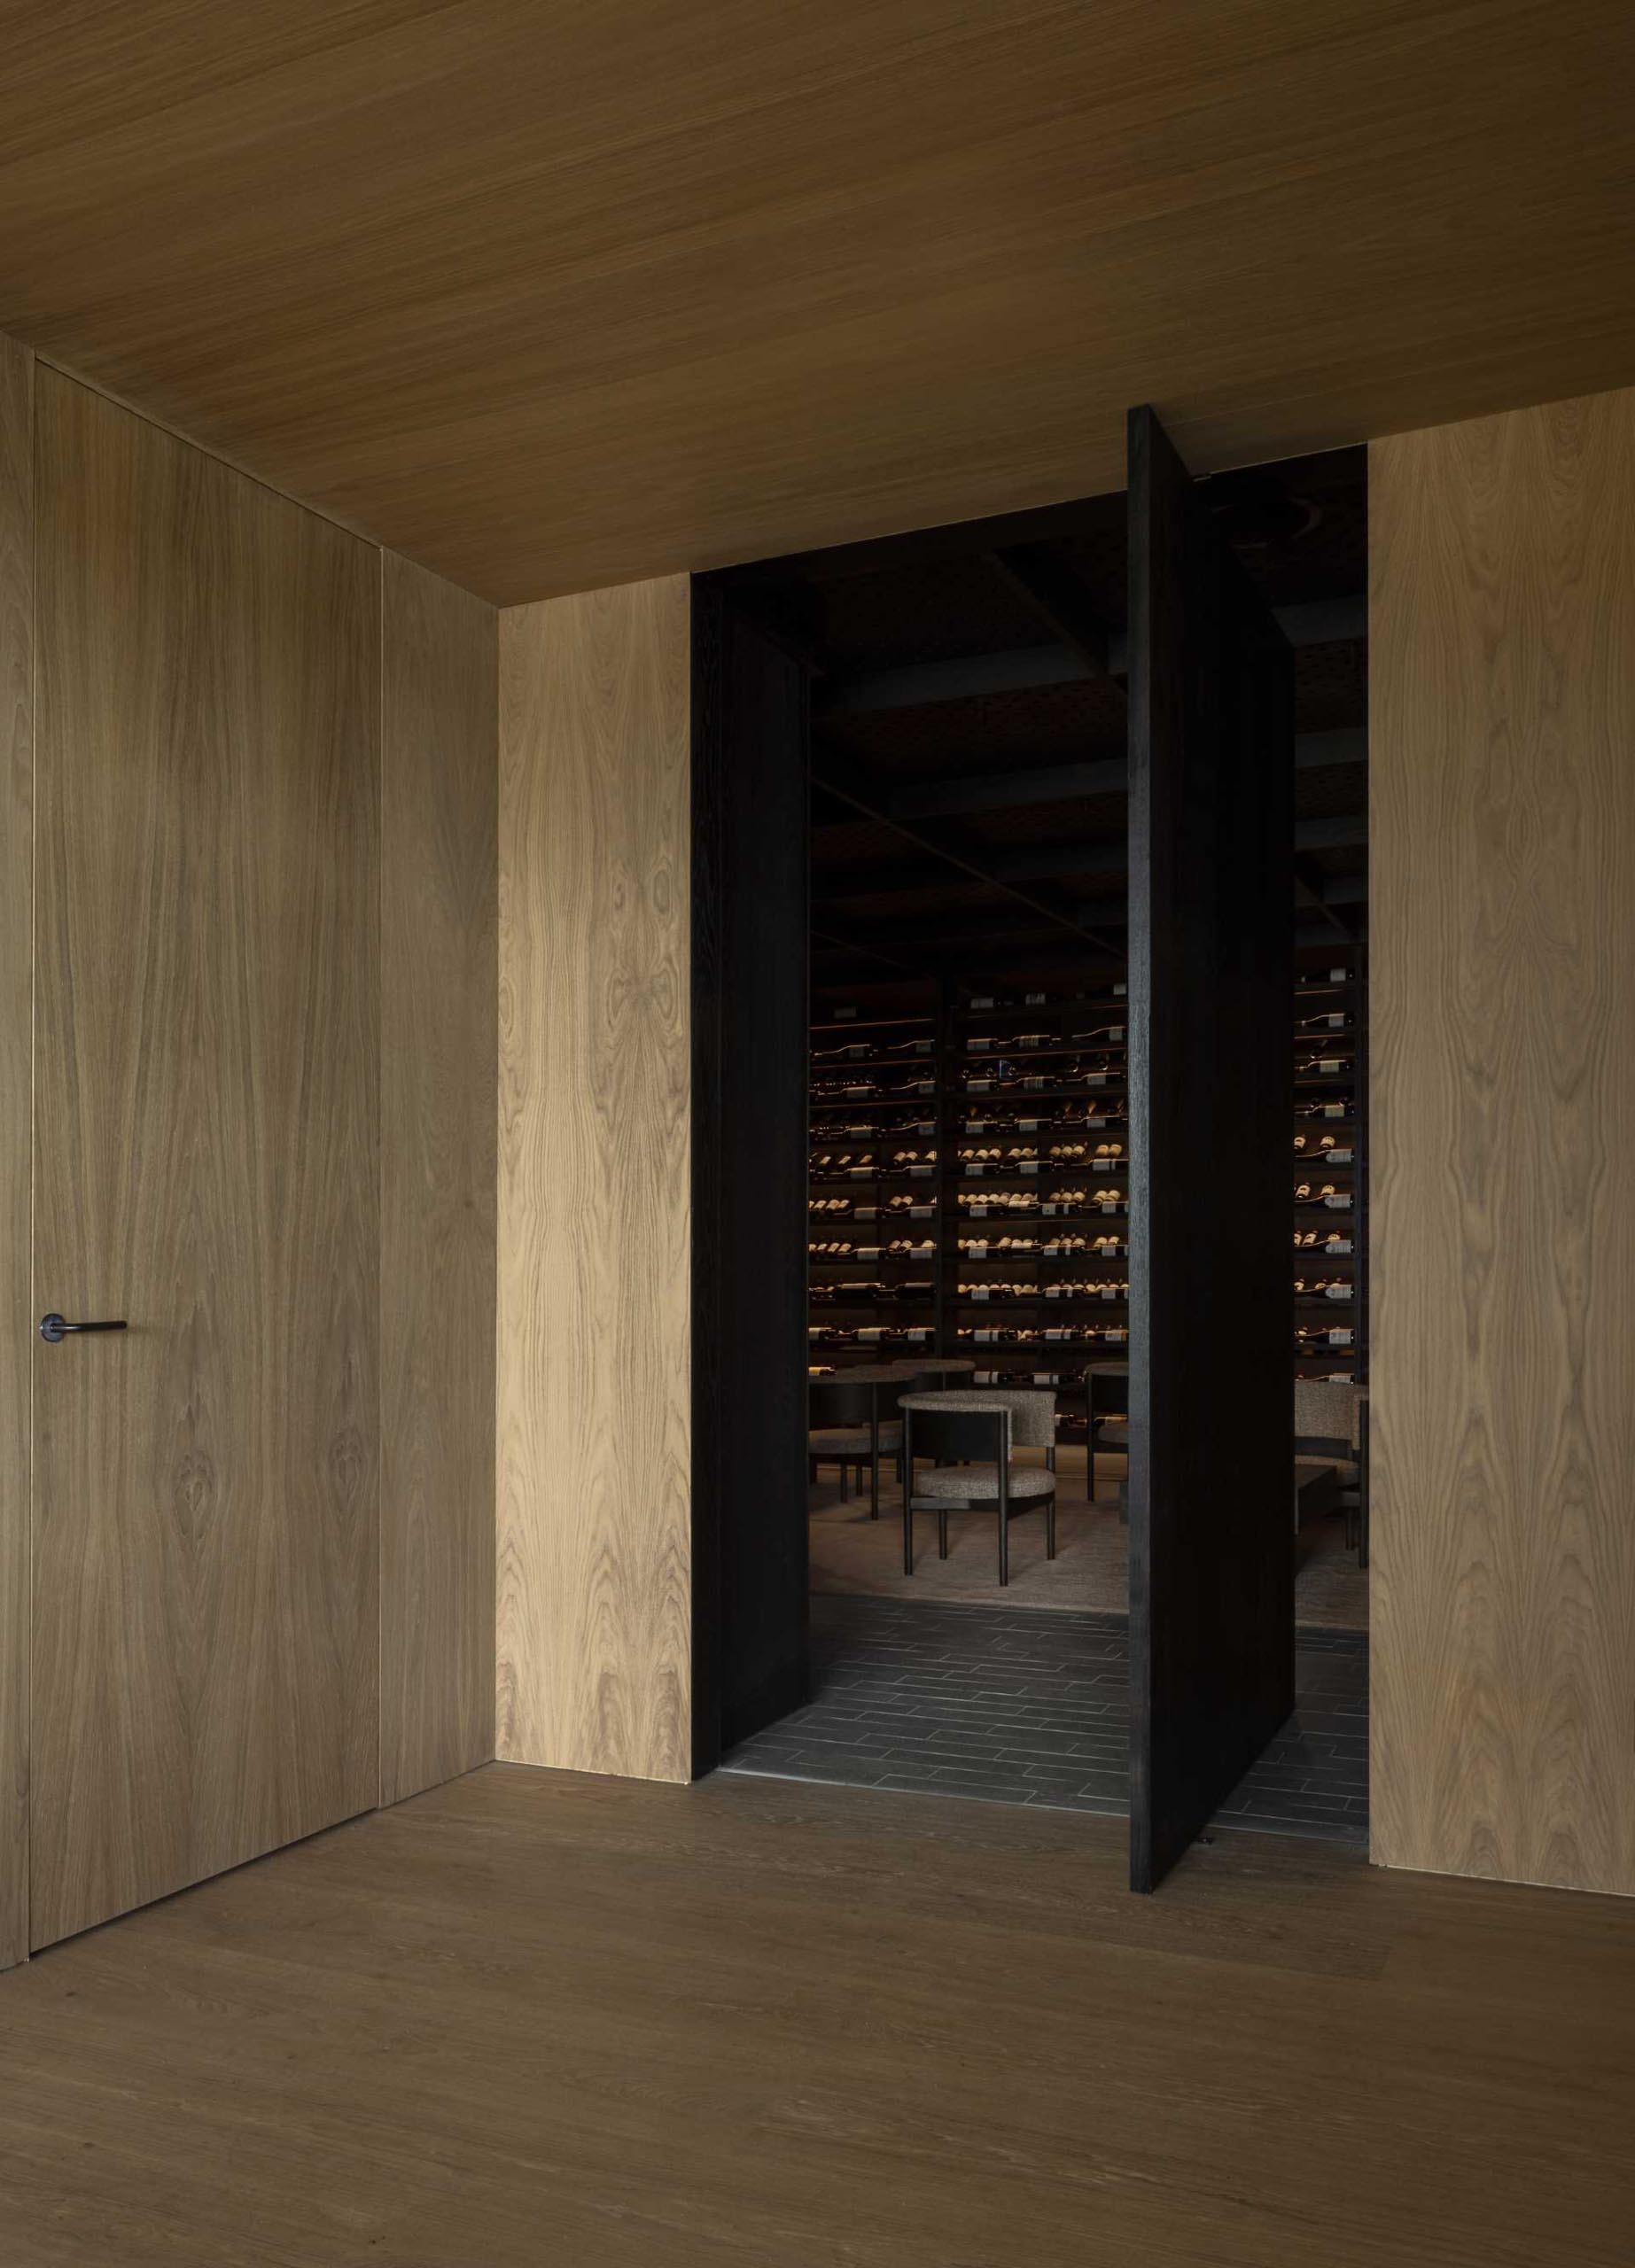 An oversized pivoting door opens to reveal a dark and moody wine cellar.